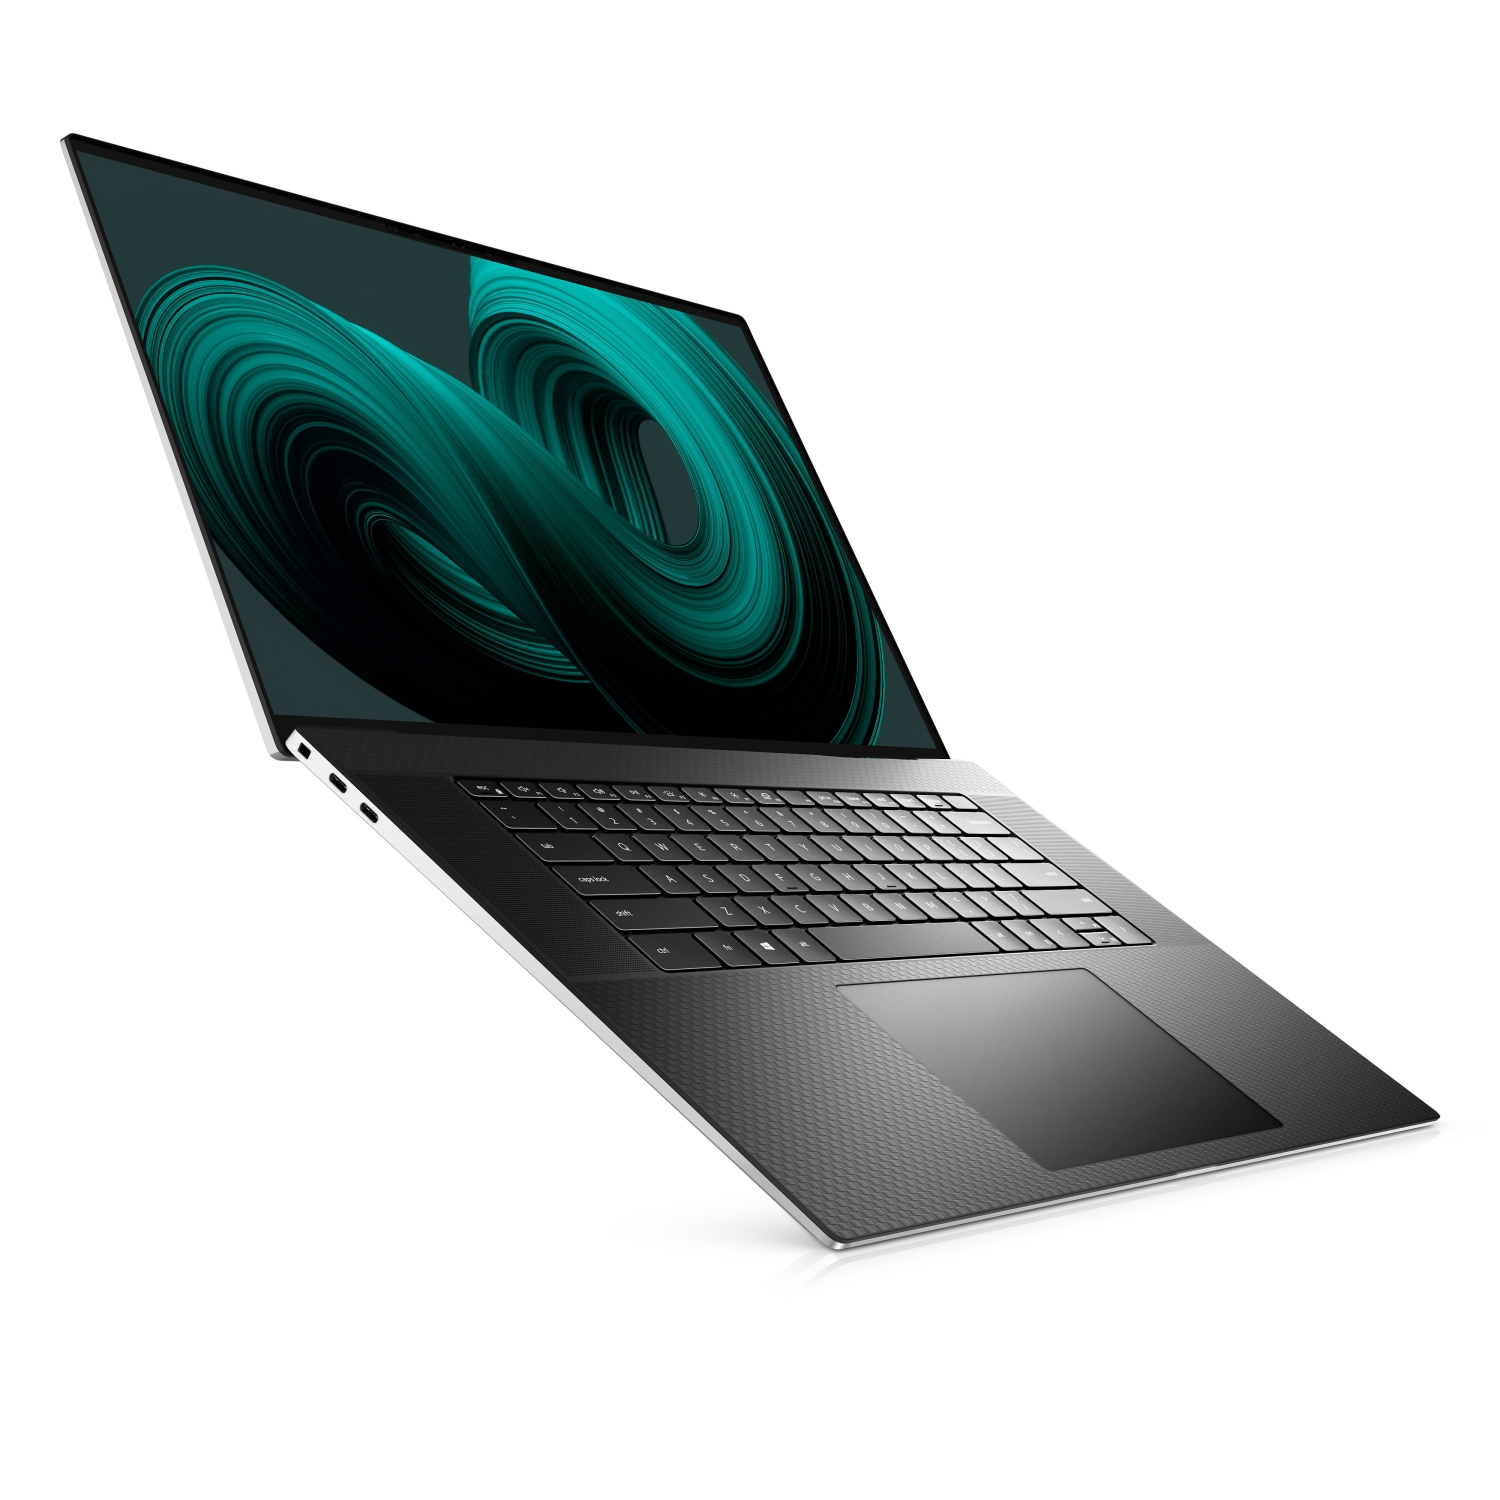 Refurbished (Excellent) - Dell XPS 17 9710 Laptop (2021) | 17" 4K Touch | Core i7 - 1TB SSD - 16GB RAM - RTX 3050 | 8 Cores @ 4.6 GHz - 11th Gen CPU Certified Refurbished